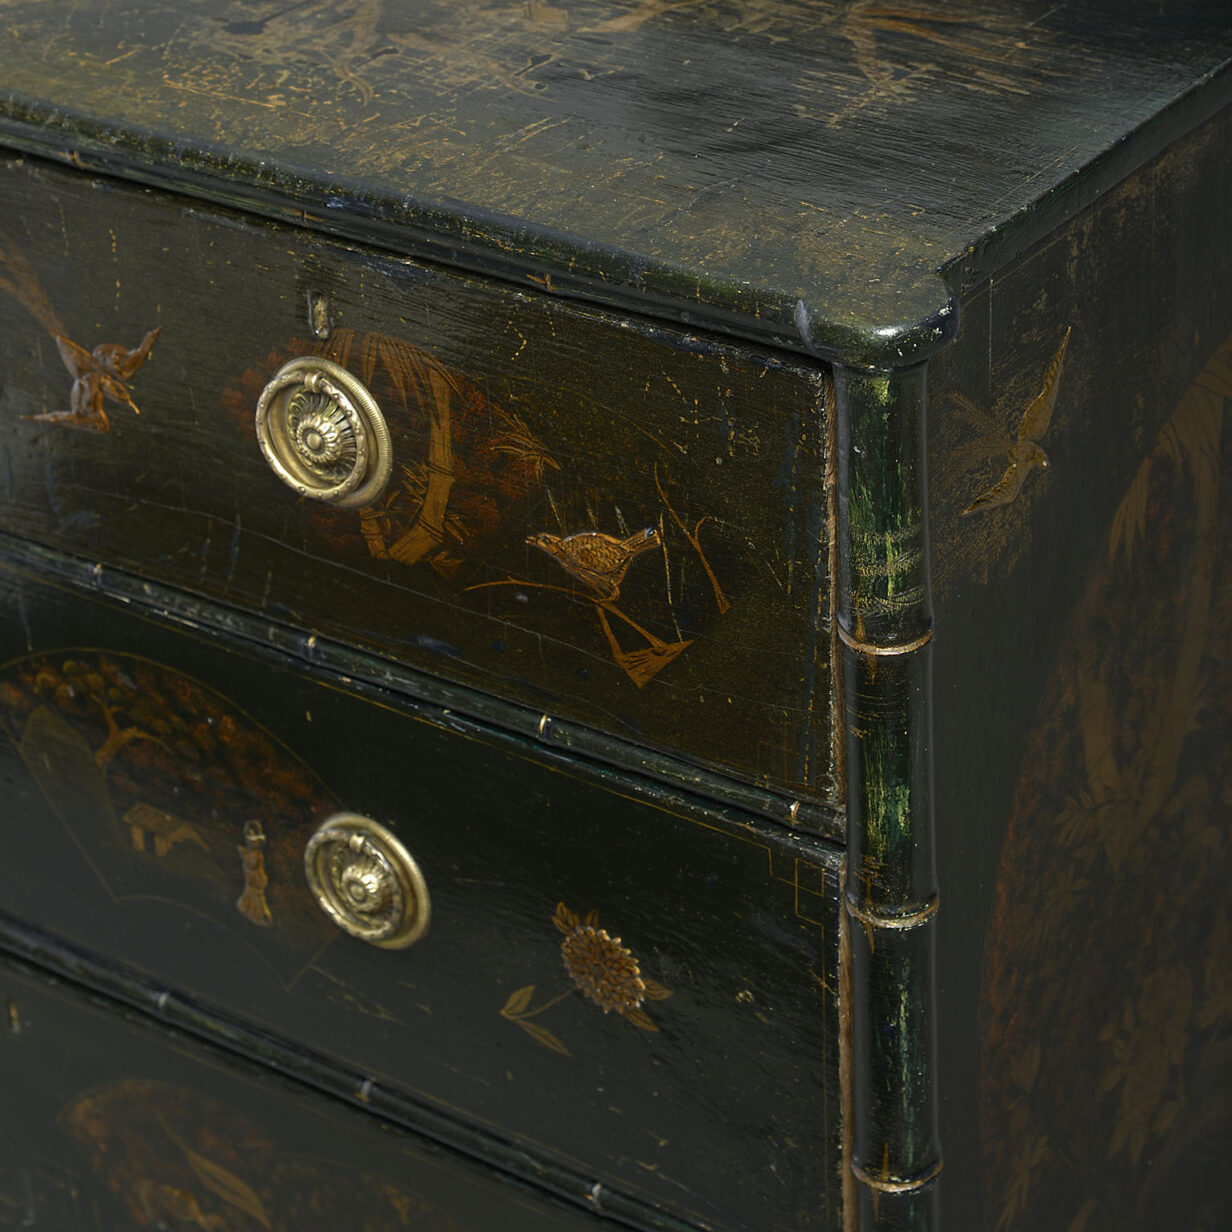 Early 19th century regency period black japanned chinoiserie chest of drawers